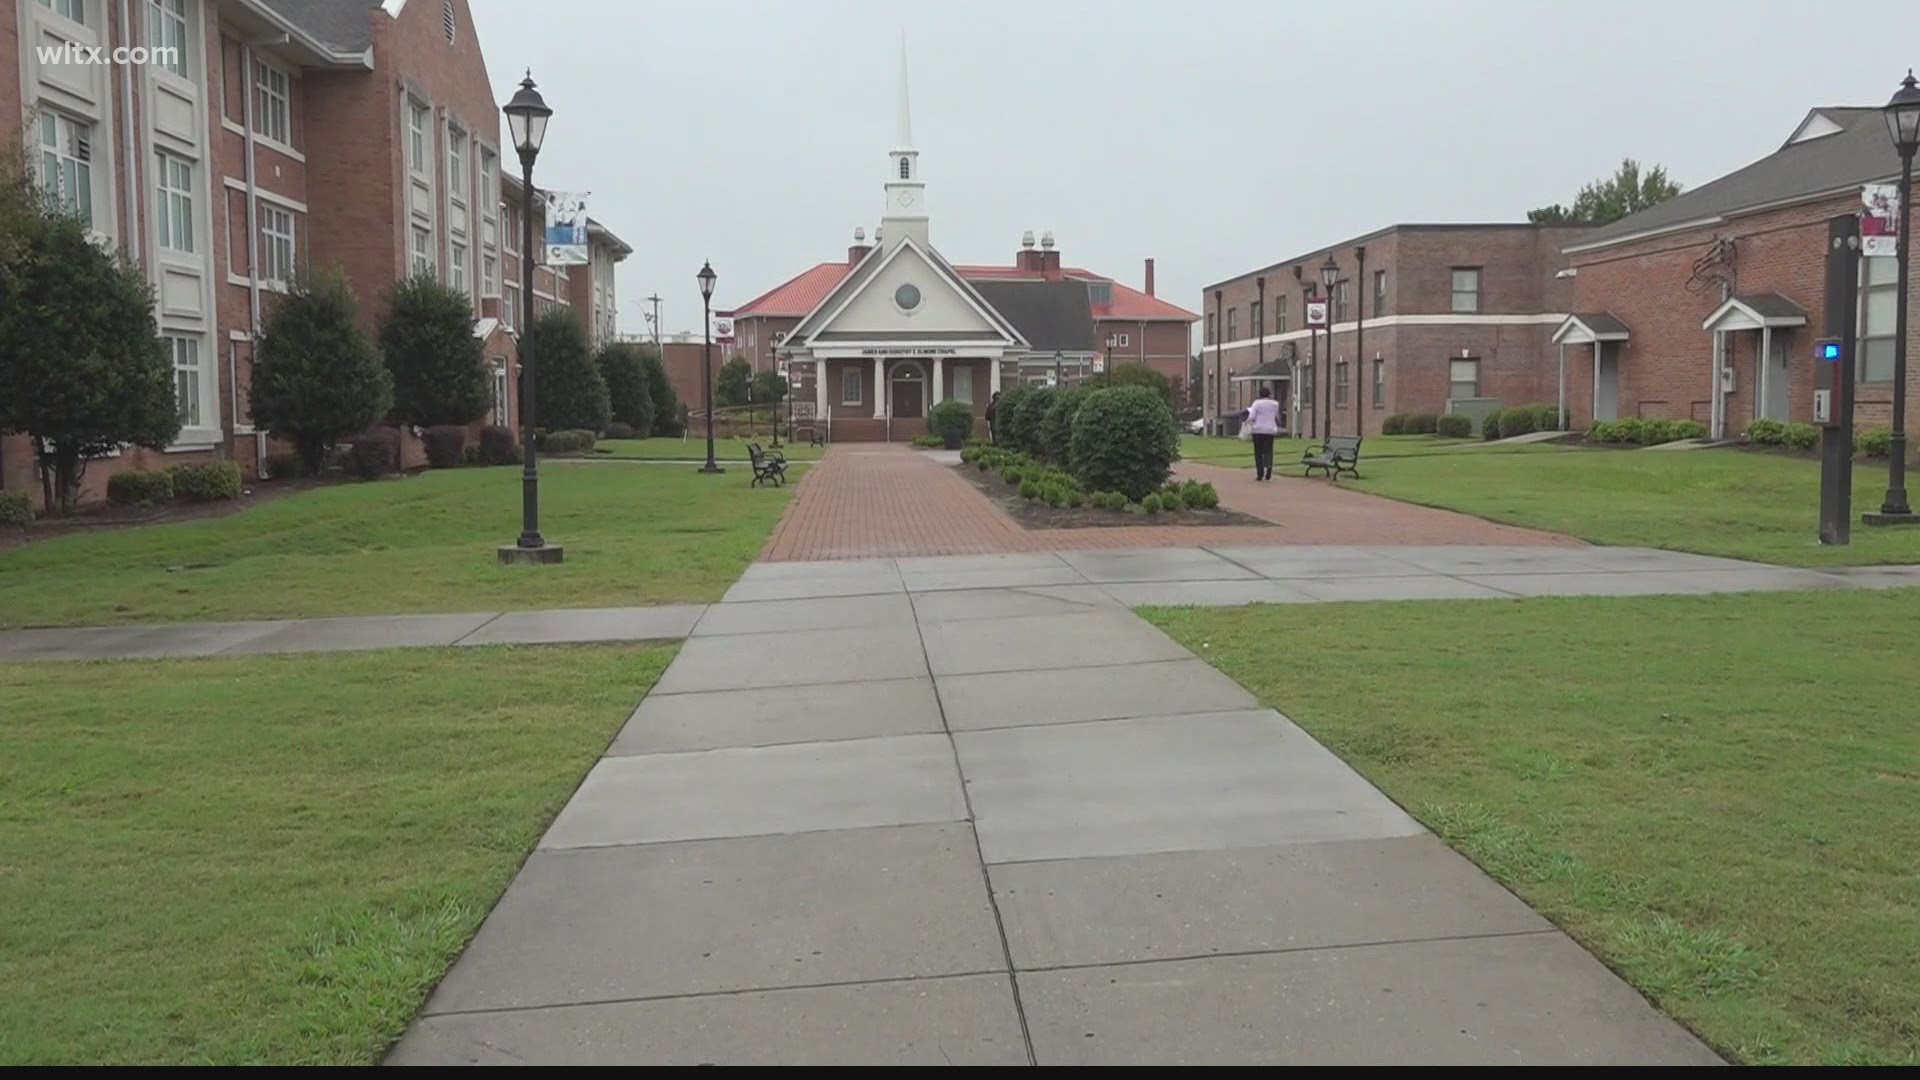 claflin-university-to-offer-bachelor-s-degrees-to-some-inmates-wltx